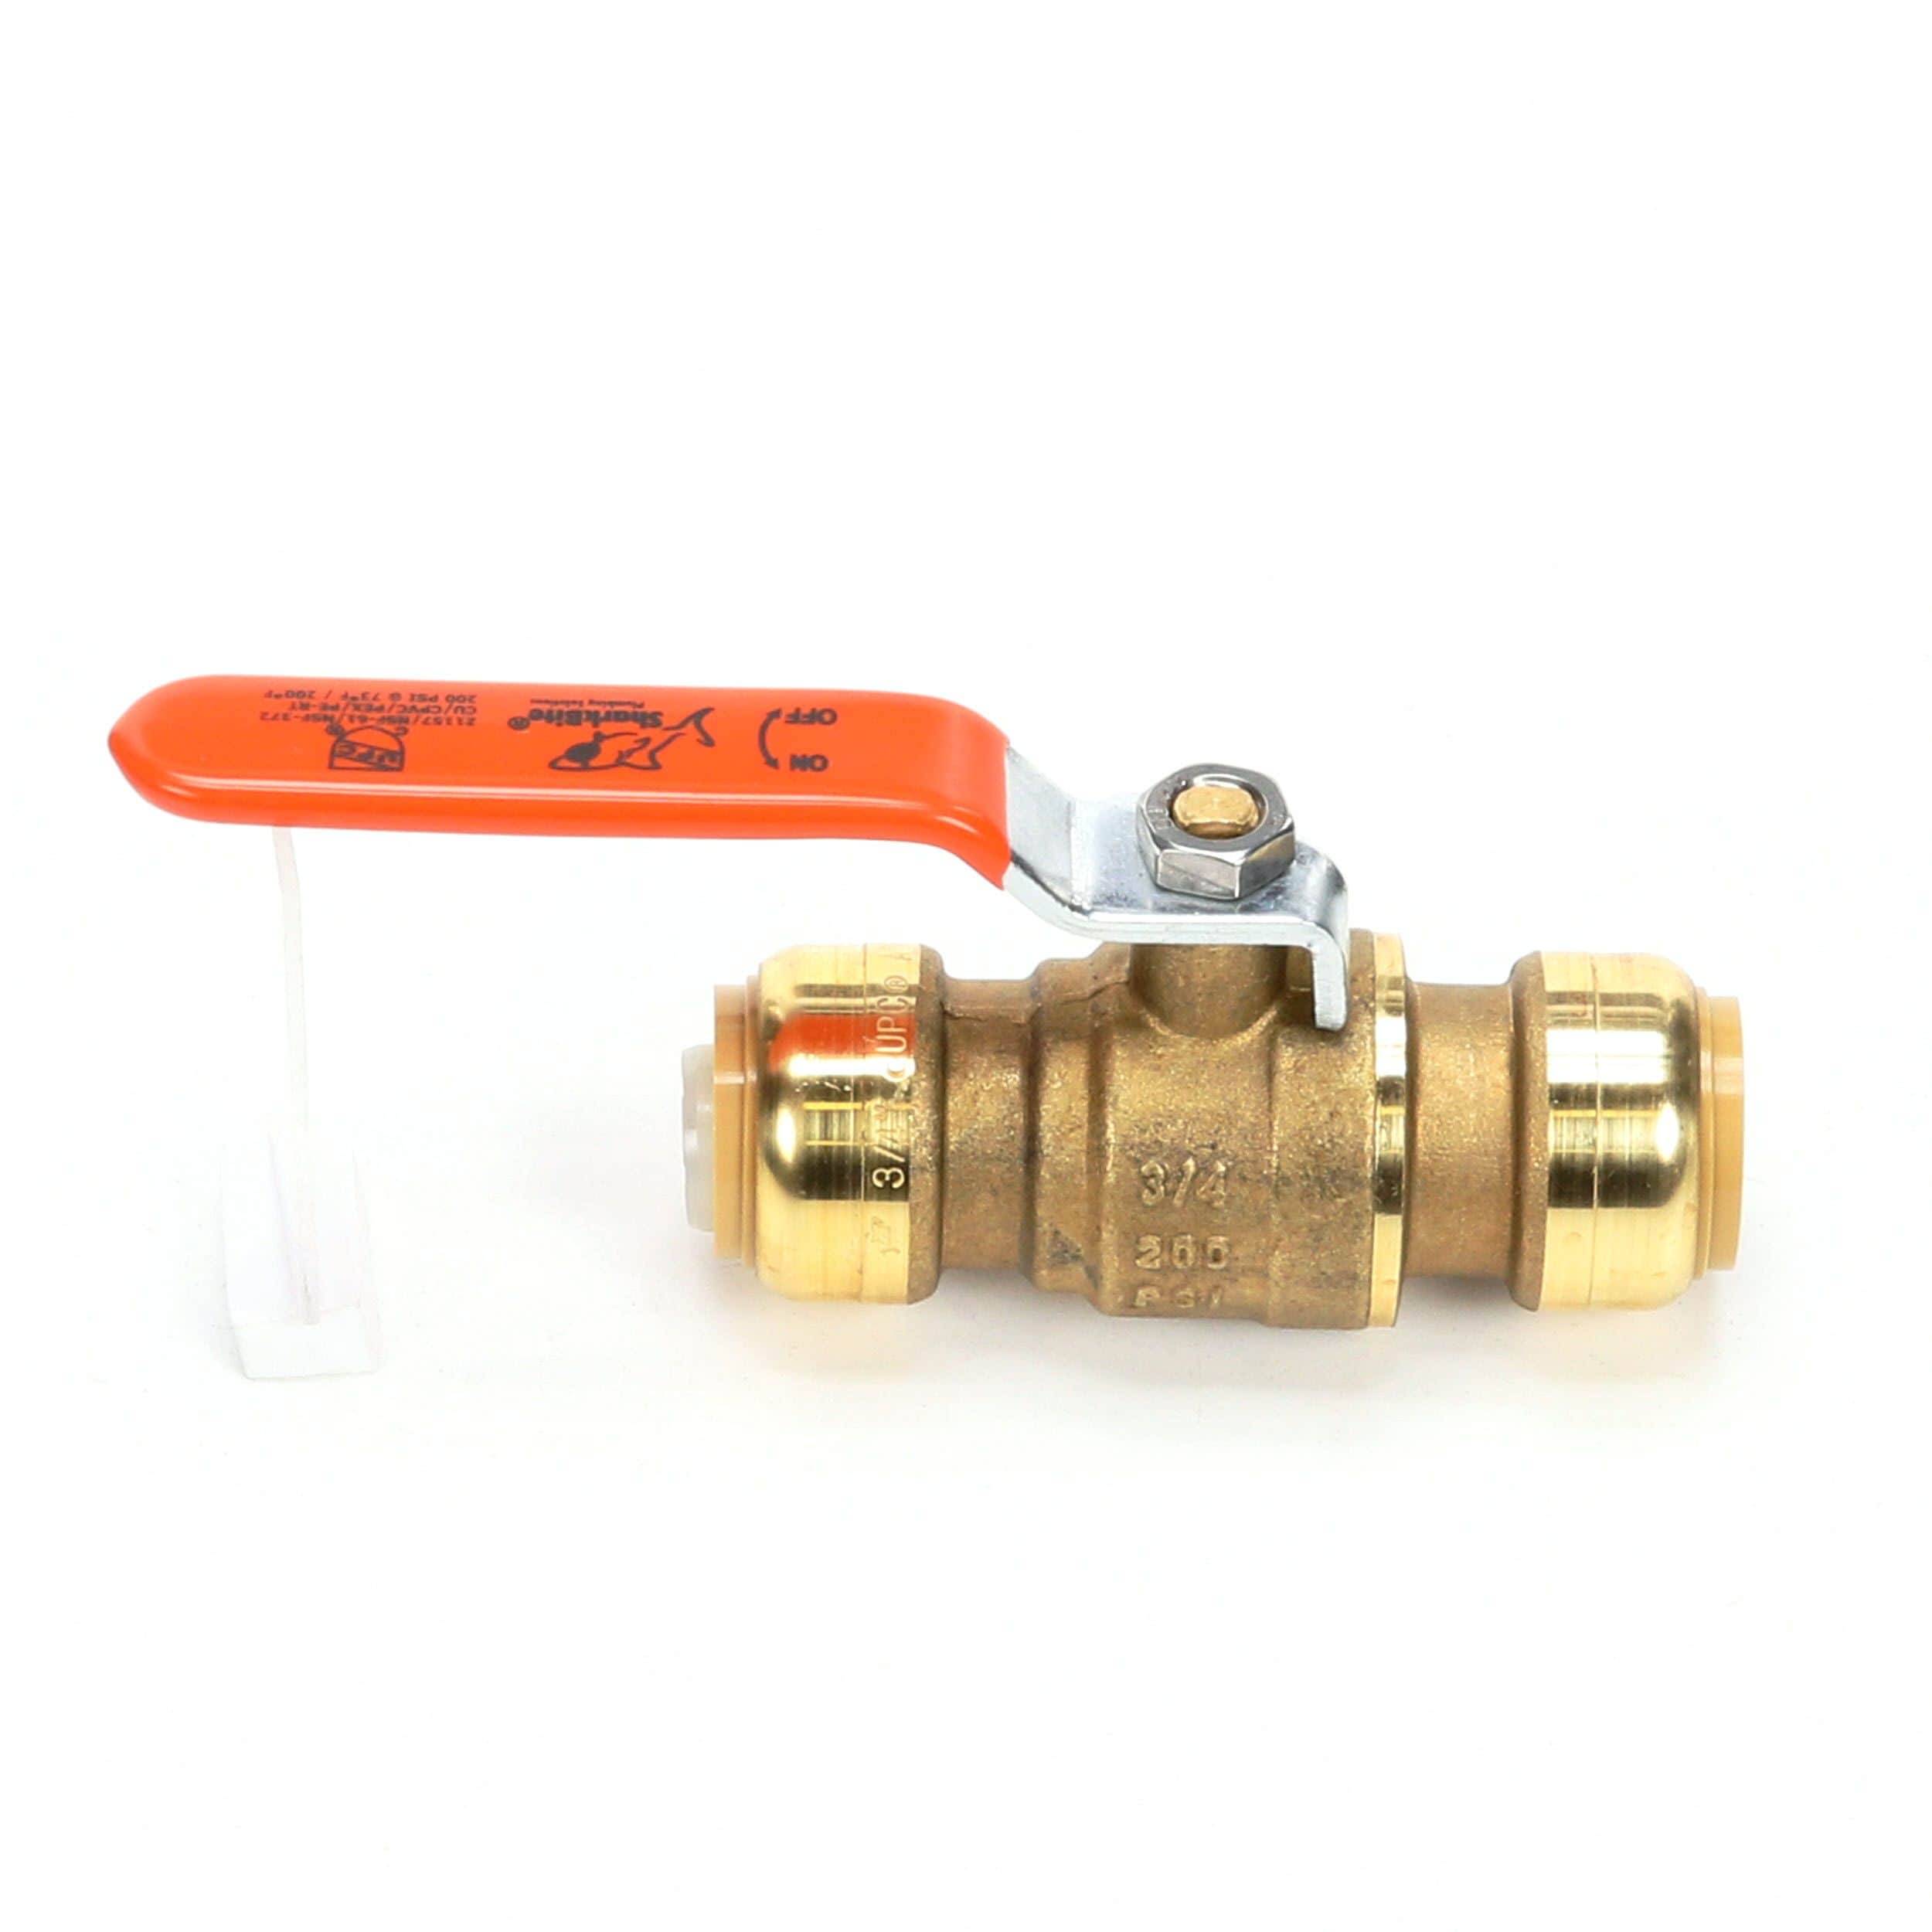 Details about   10 PIECES XFITTING 3/4" PUSH FIT FULL PORT BALL VALVES CERTIFIED TO NSF ANSI6... 